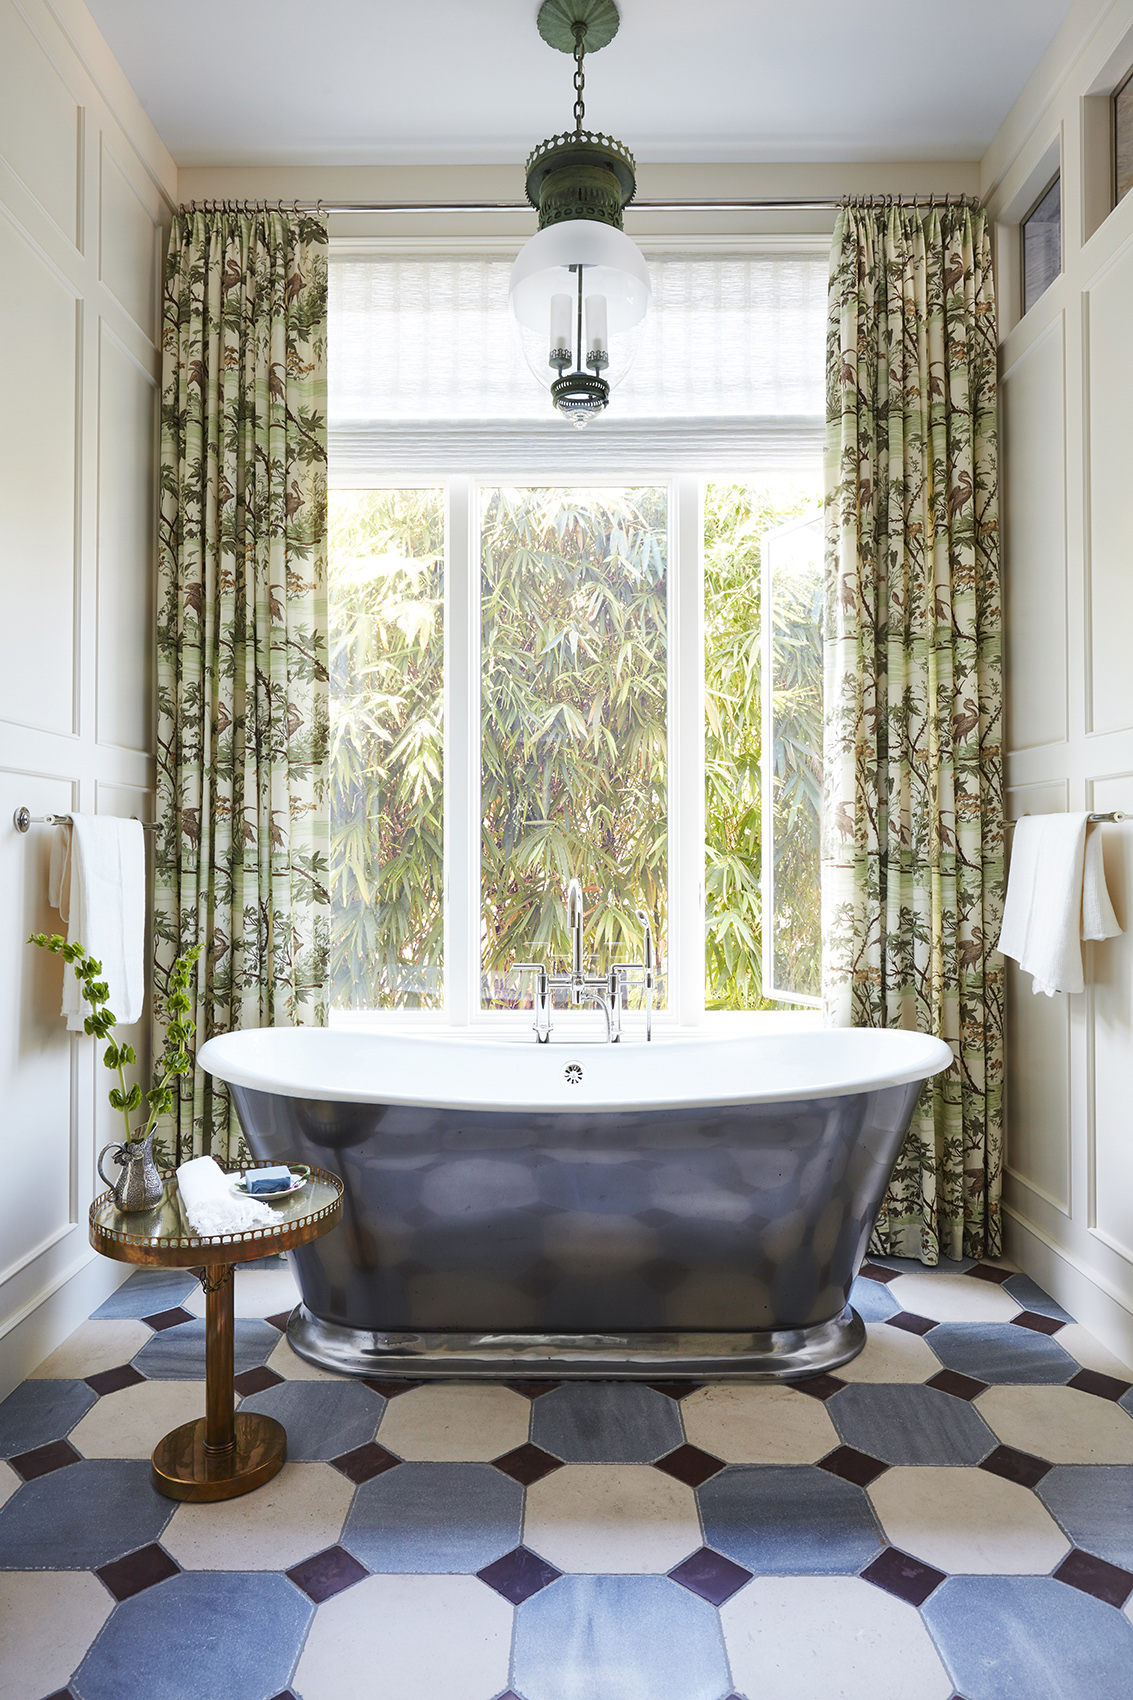 Naples Florida Bathroom design by Summer Thornton with a soaking tub, patterned floor, and draperies.